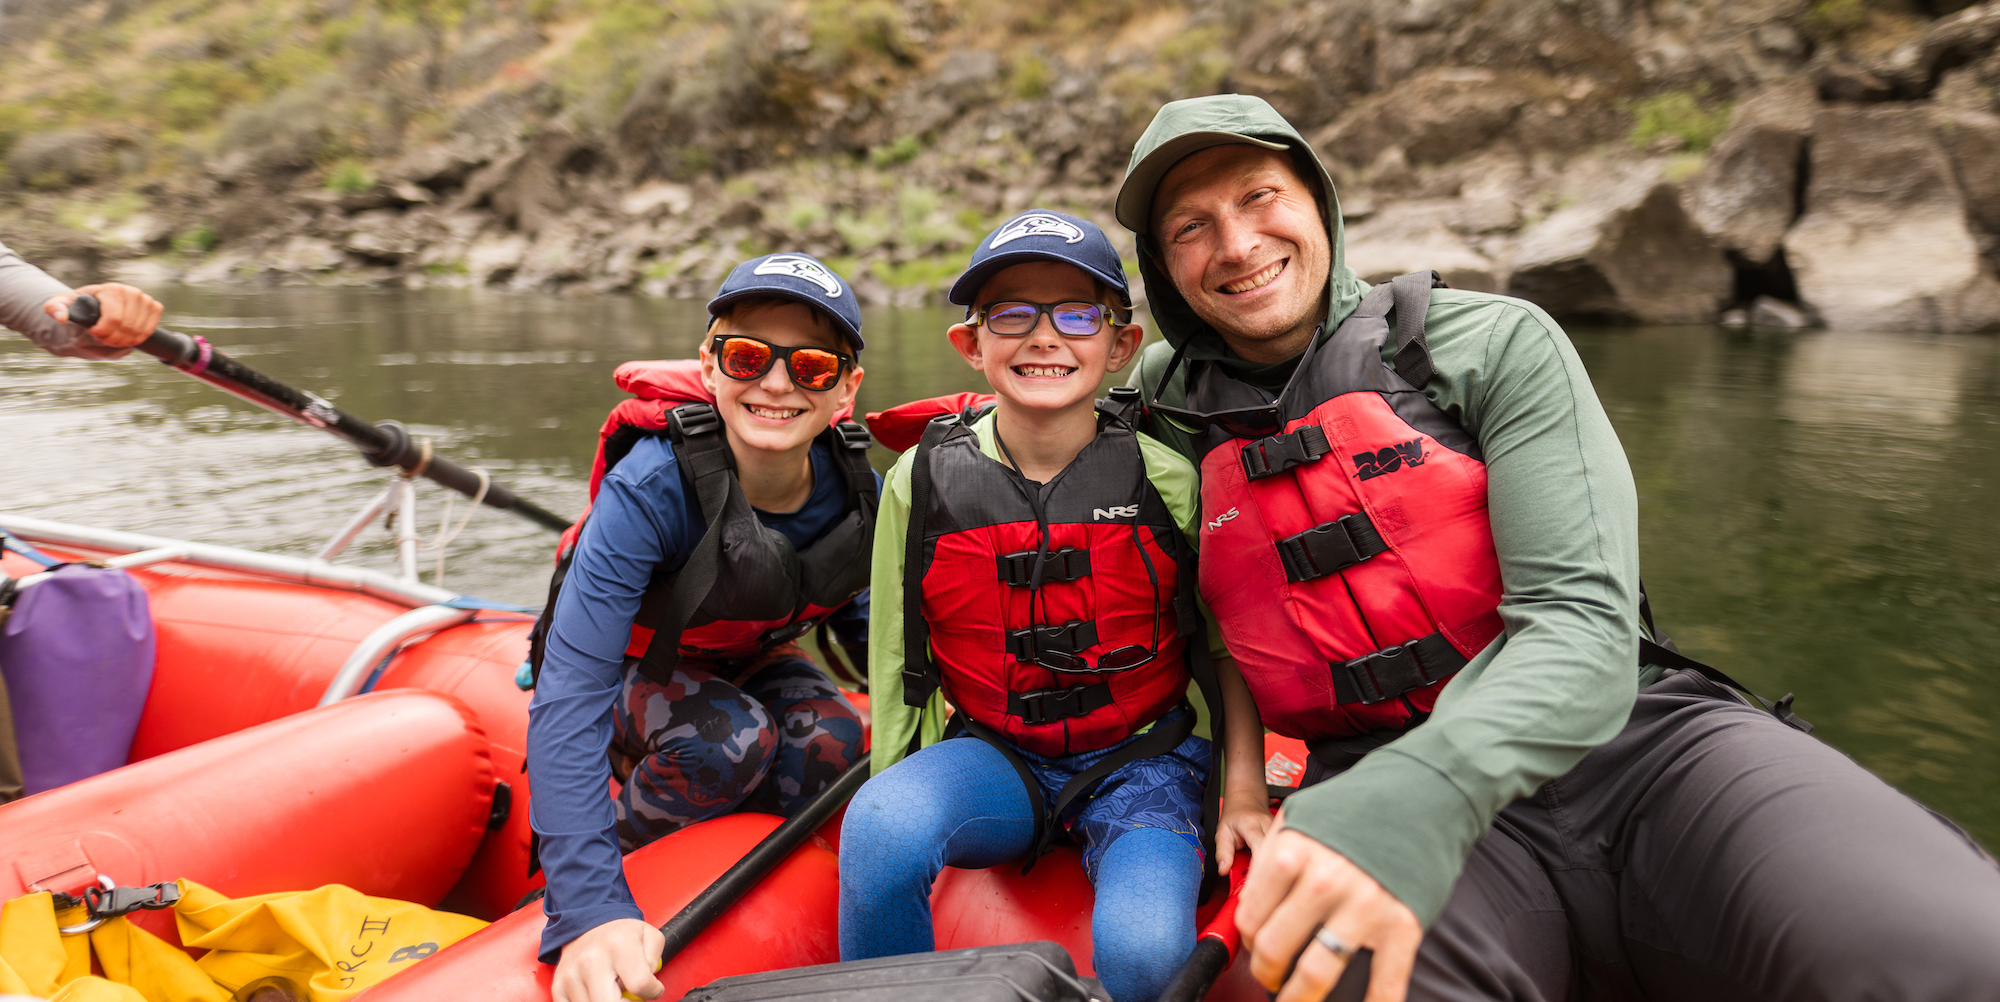 A dad and his two sons sitting on a red raft on the Lower Salmon River in Idaho